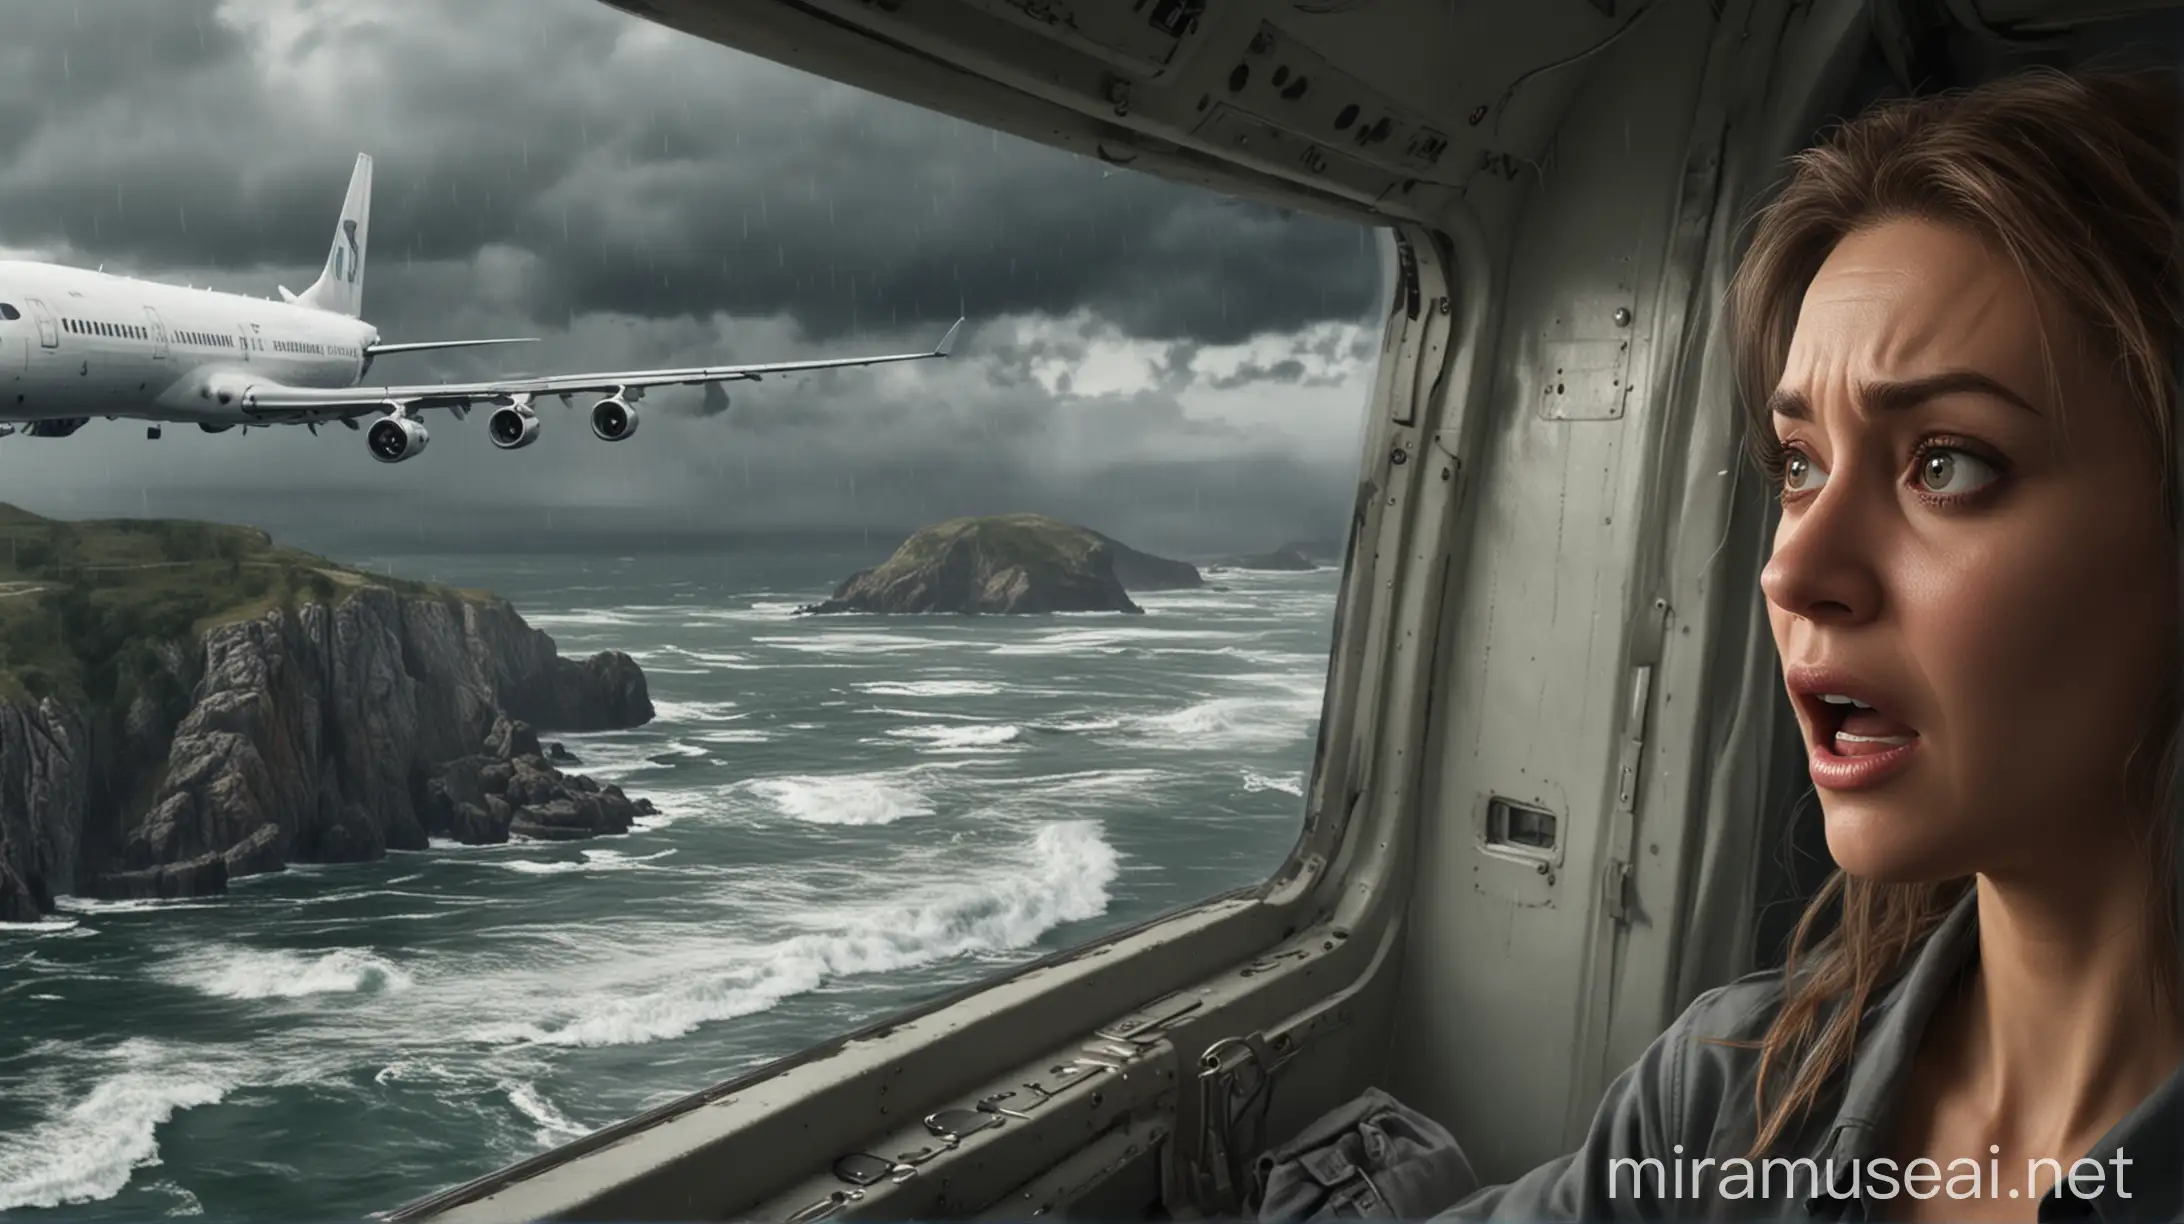 In the foreground, a woman looks out of the airplane window with a terrified expression. In the background, an airplane is approaching a runway situated on a cliff, with a stormy sea below.Realistic